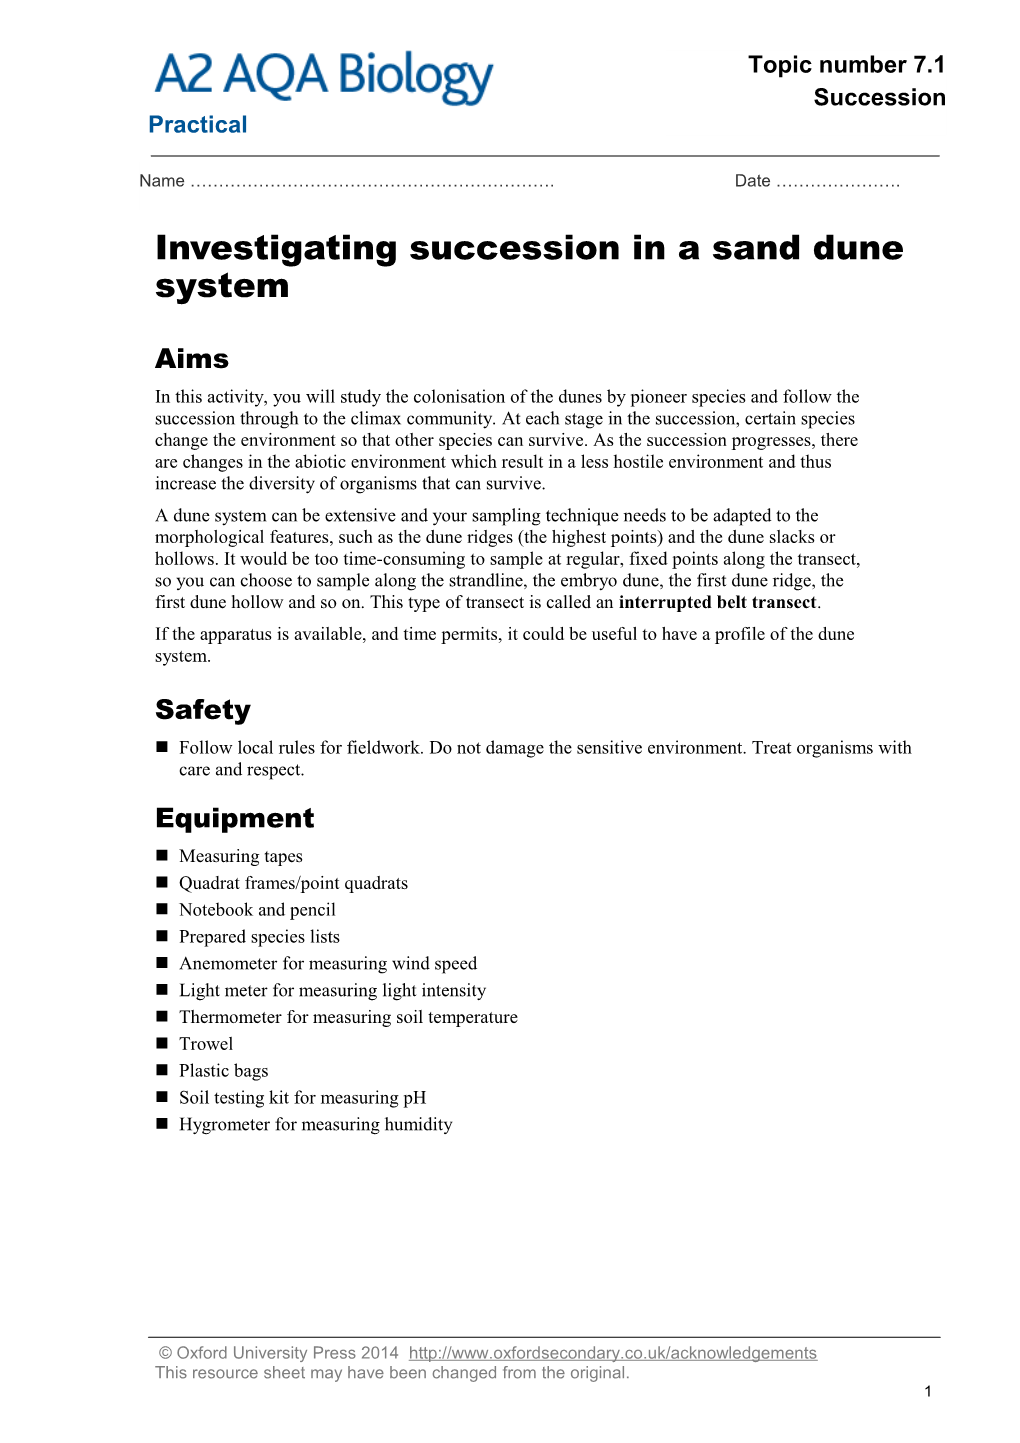 Investigating Succession in a Sand Dune System